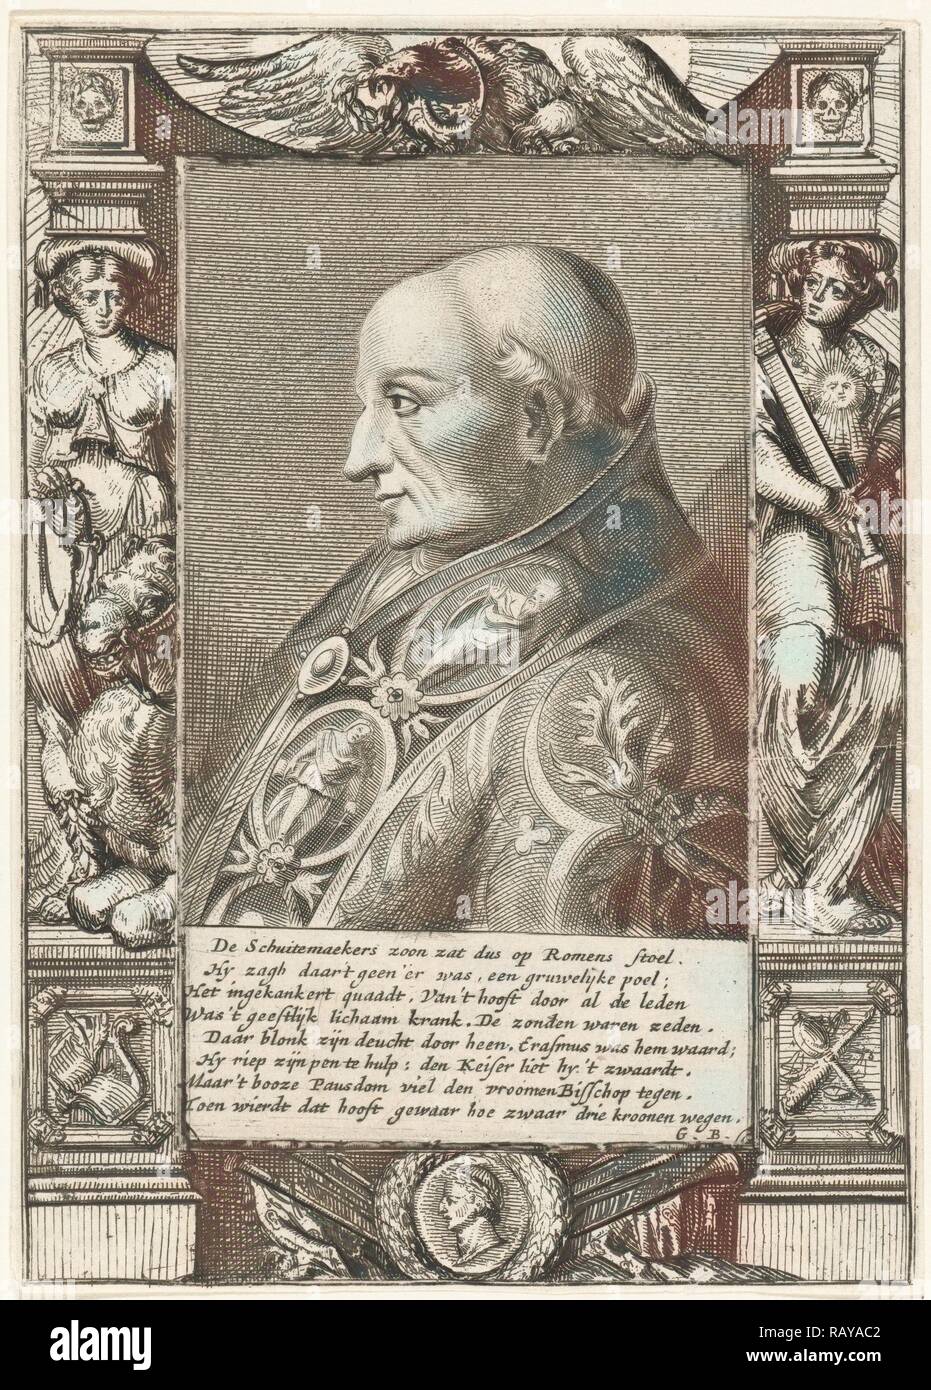 Portrait of Pope Adrian VI, Hendrik Bary, Geeraert Brandt (I), 1657-1707. Reimagined by Gibon. Classic art with a reimagined Stock Photo